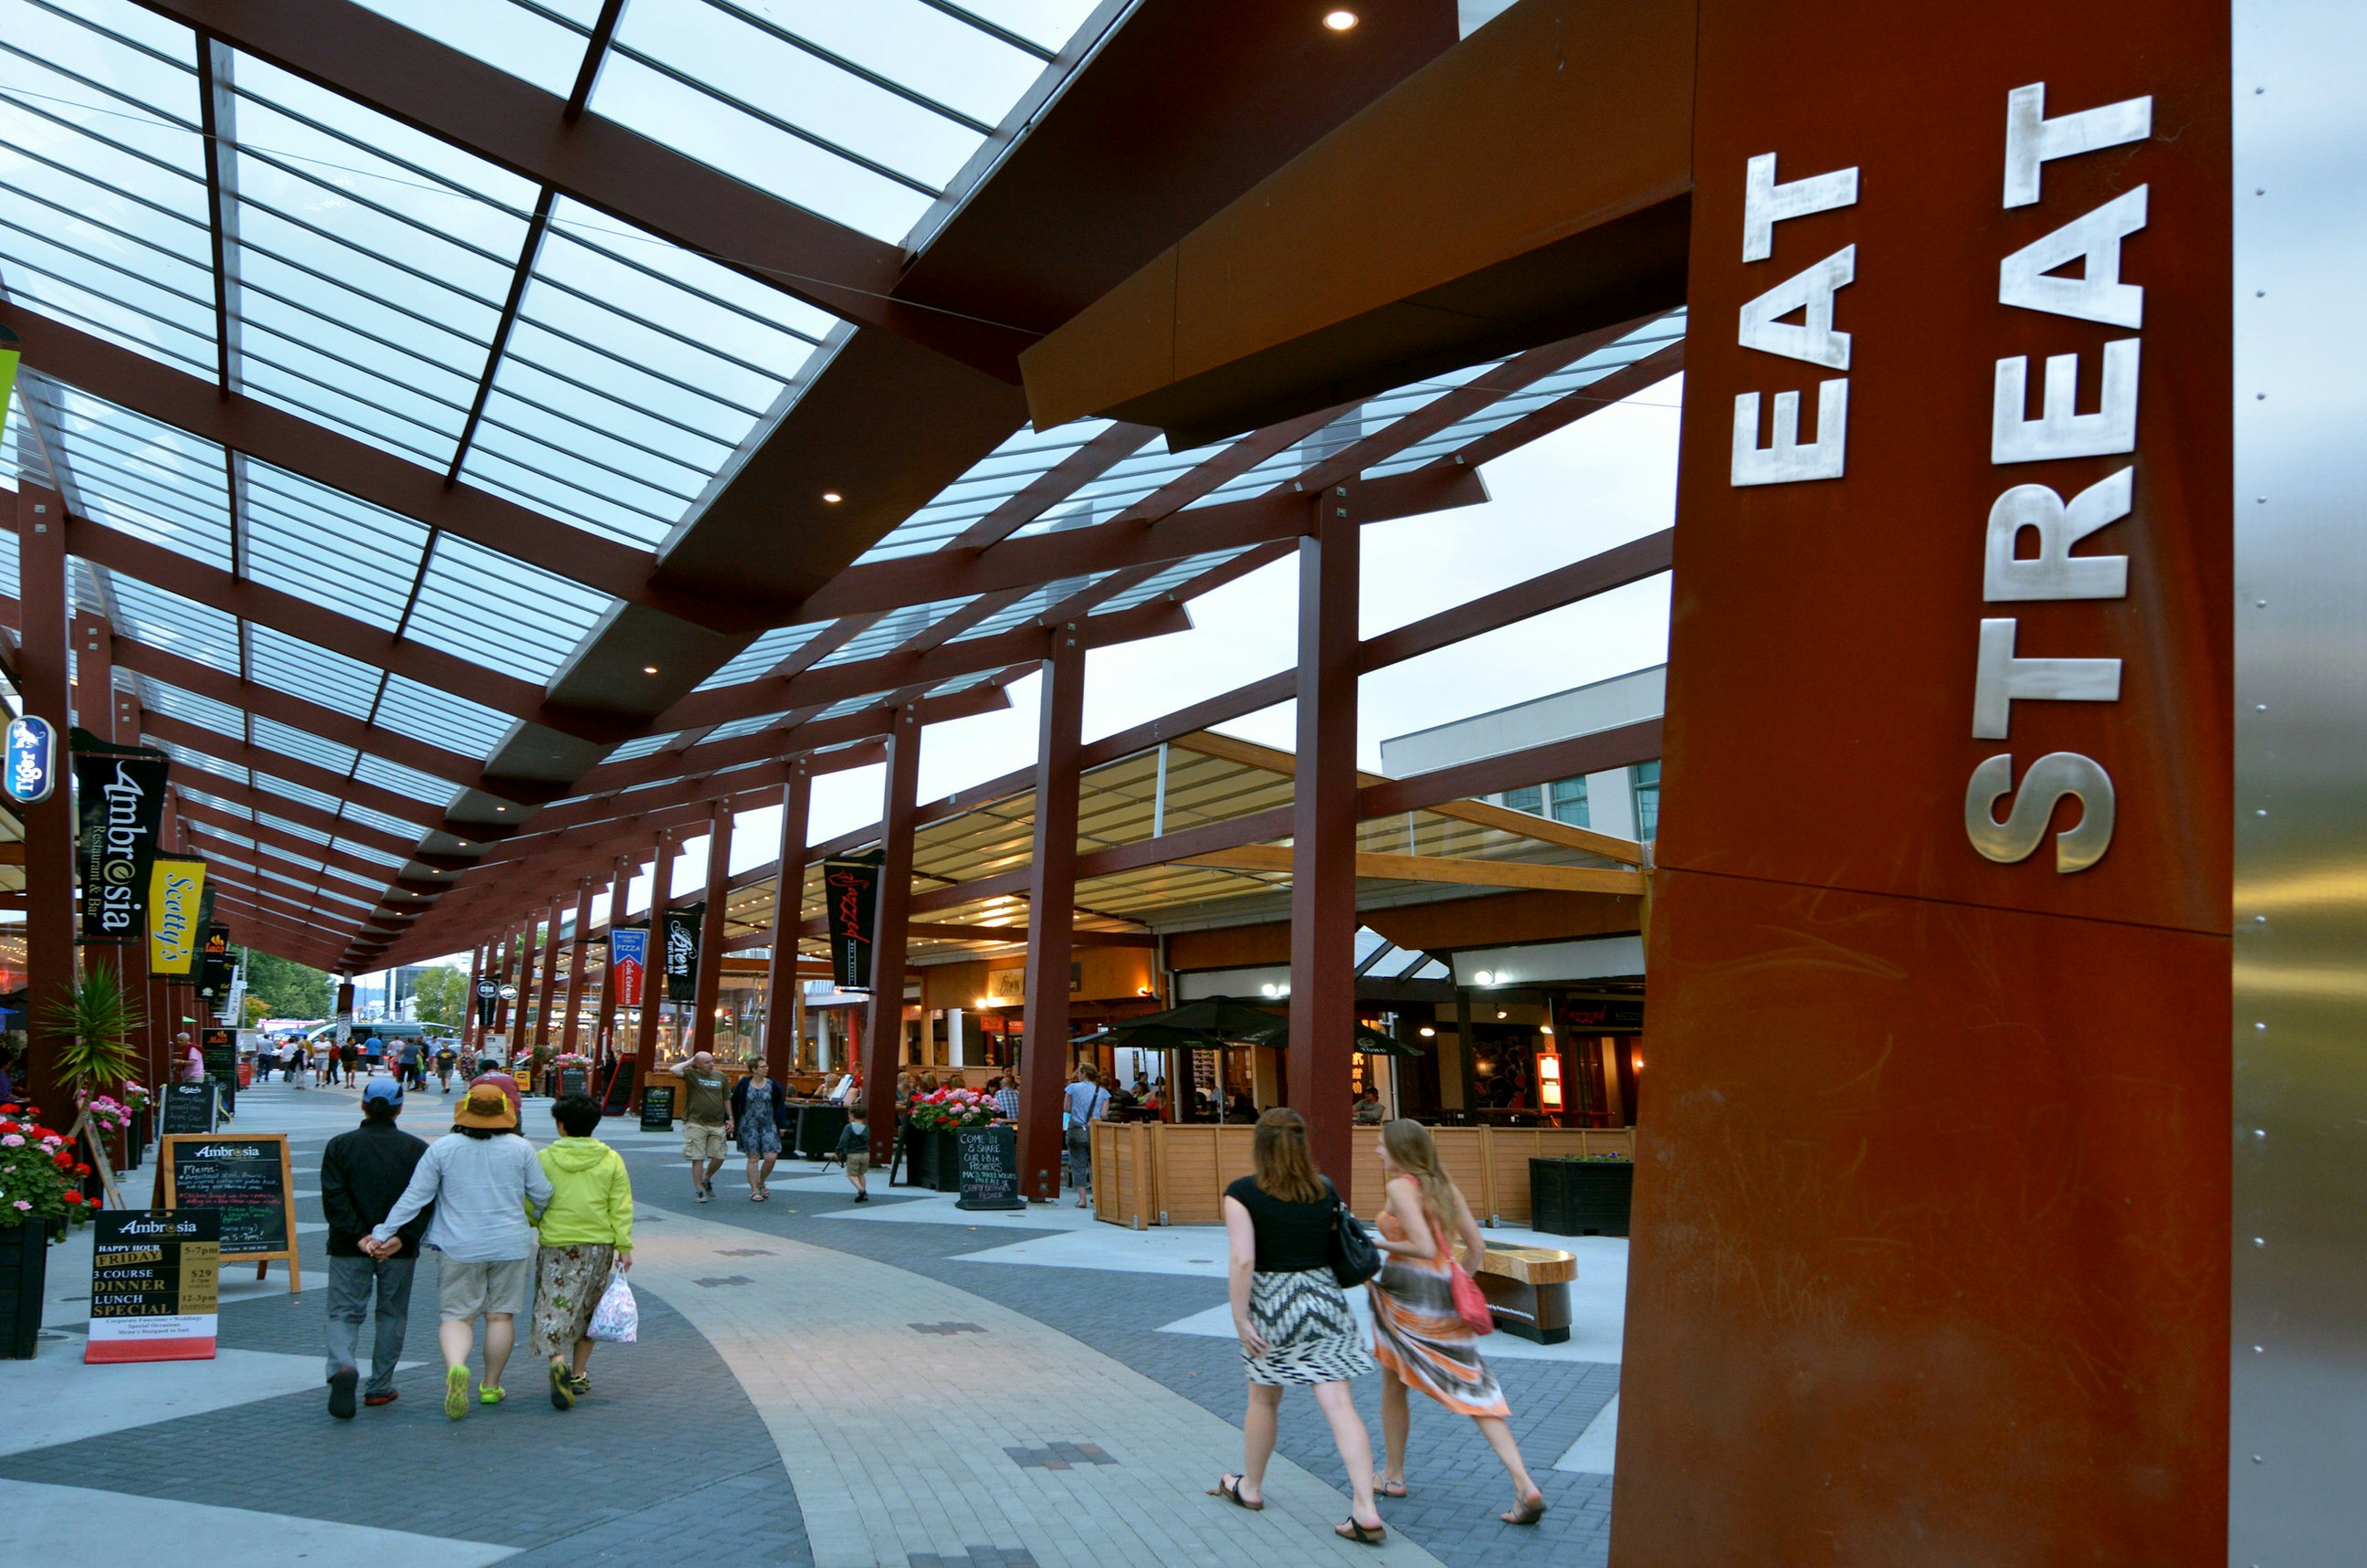 People walk down a paved street under a glass and steel canopy. There are bars and restaurants on either side and in the foreground is a sign that says 'Eat Streat' in capital letters.